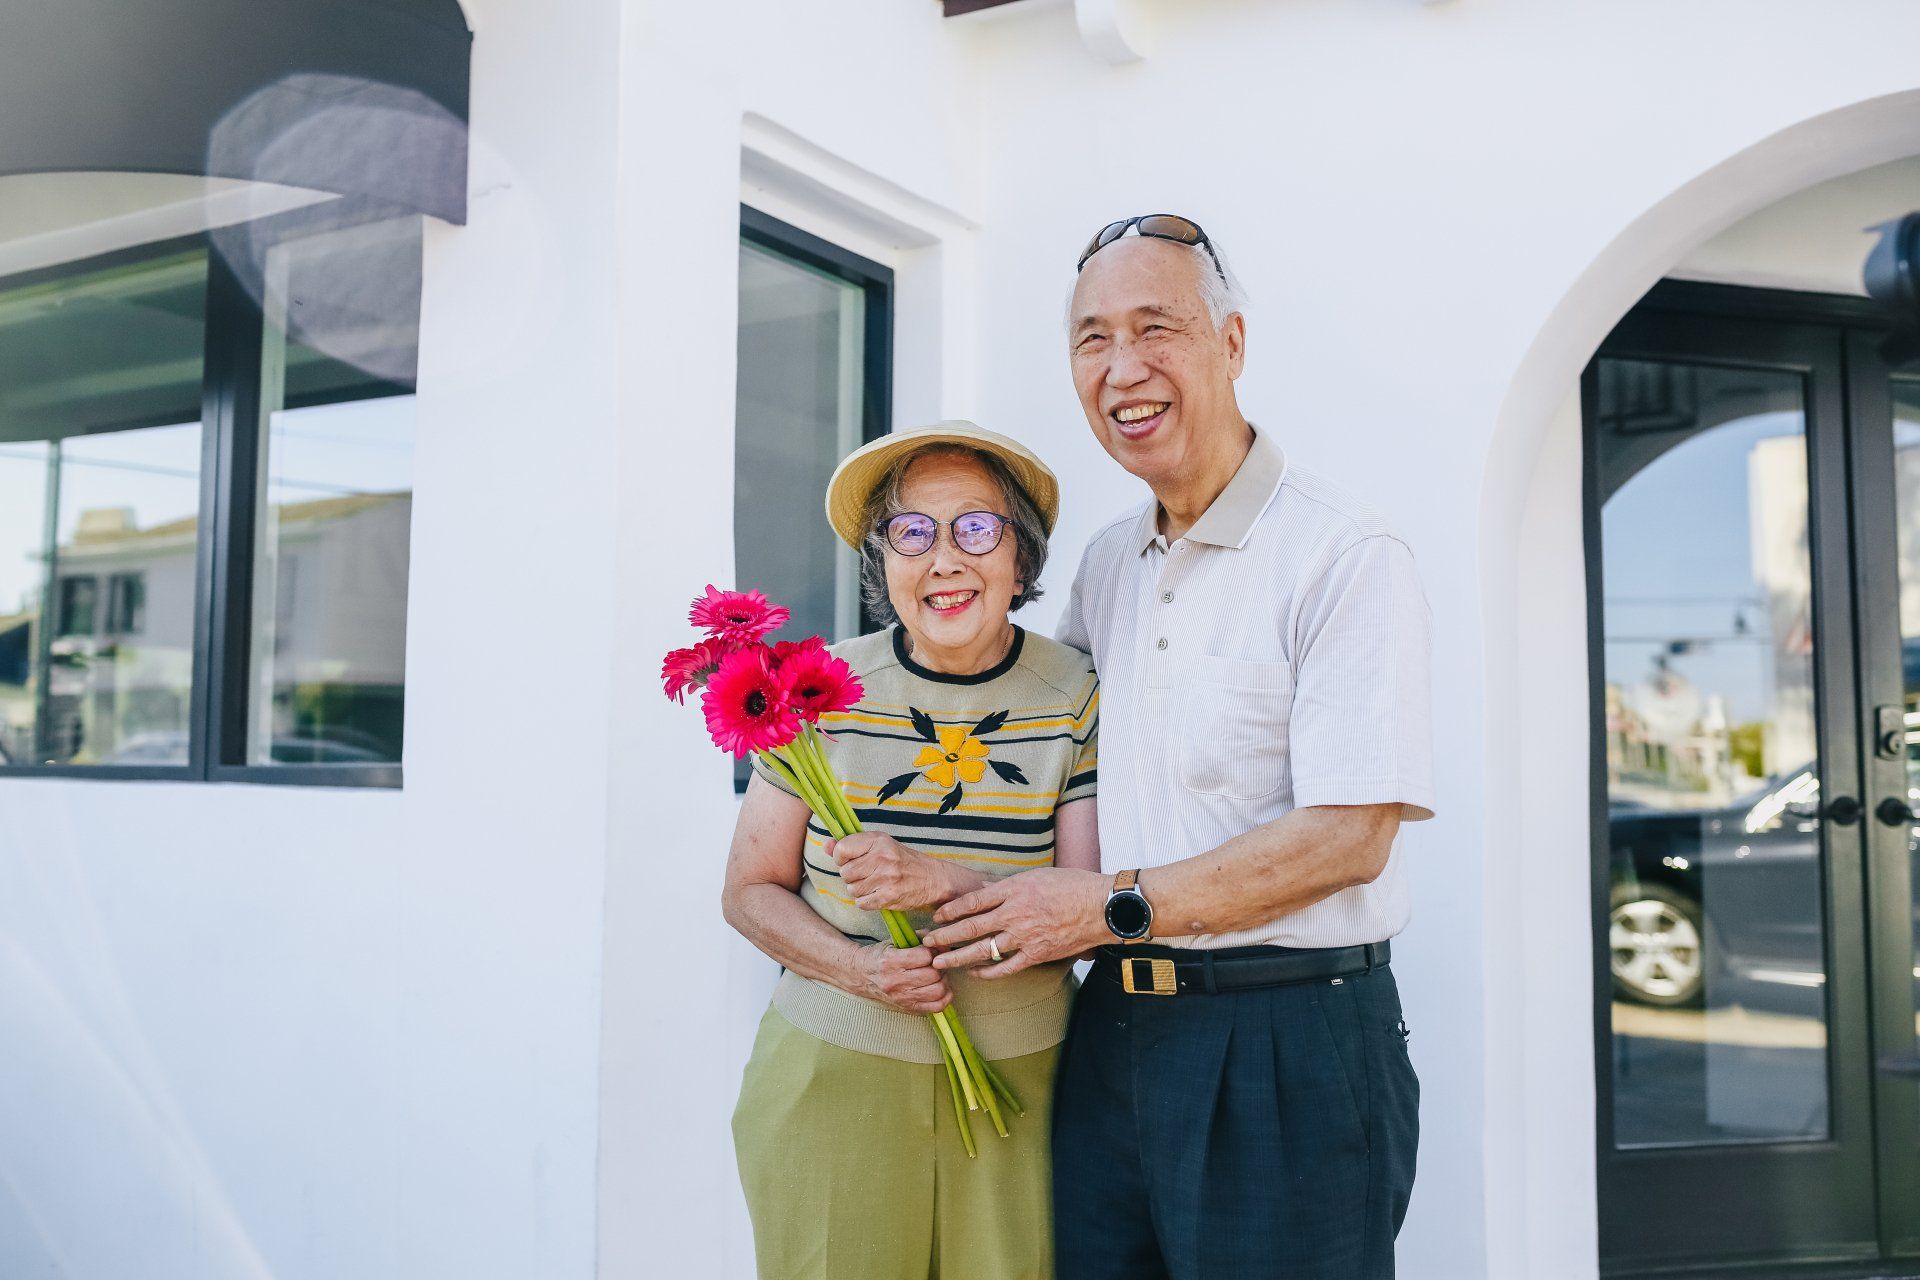 An elderly couple is standing in front of a white building holding flowers.